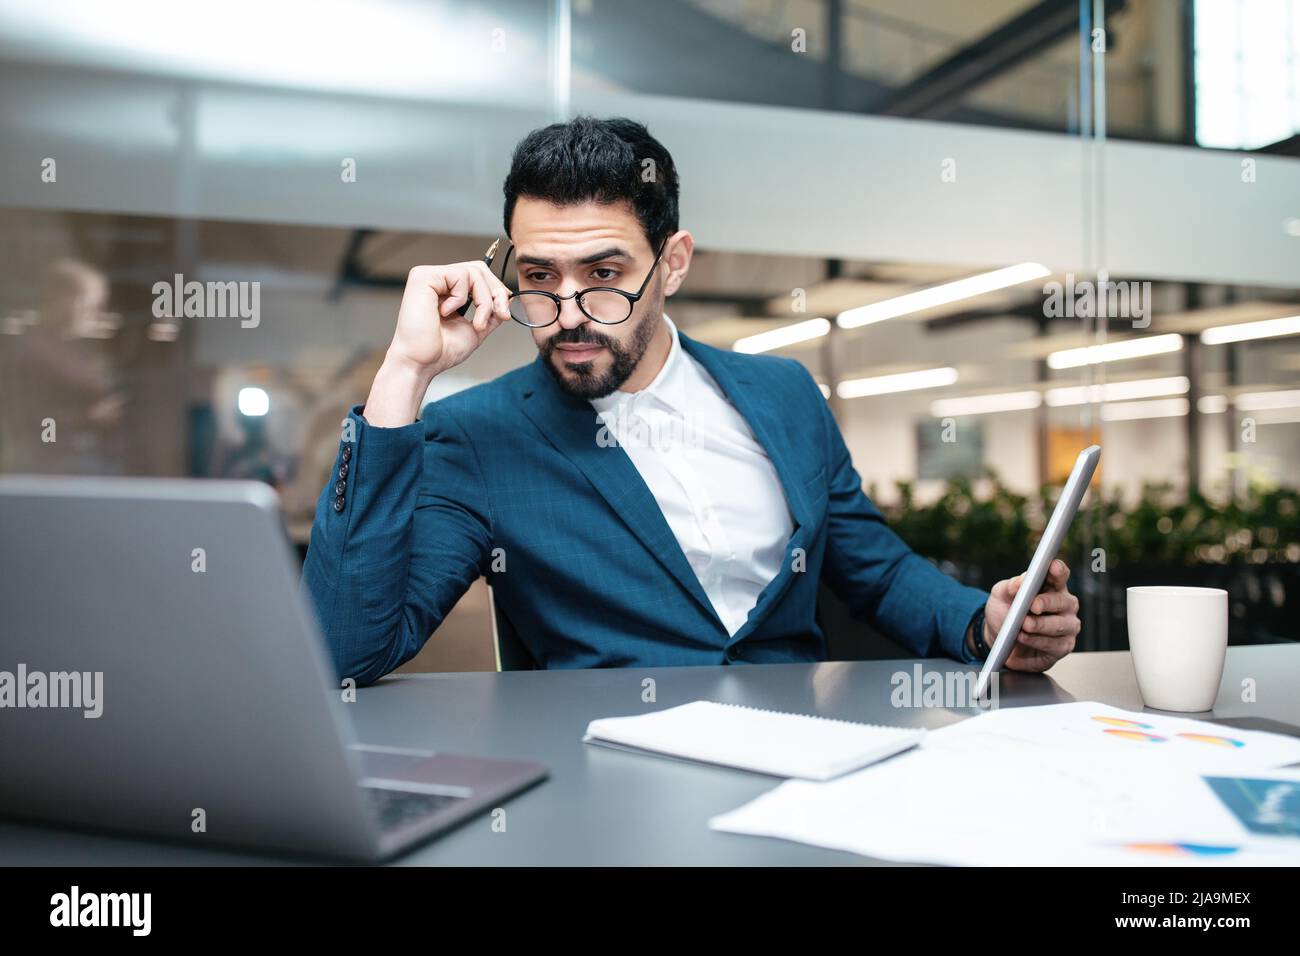 Serious busy attractive millennial arab businessman with beard in glasses works with computer and documents Stock Photo